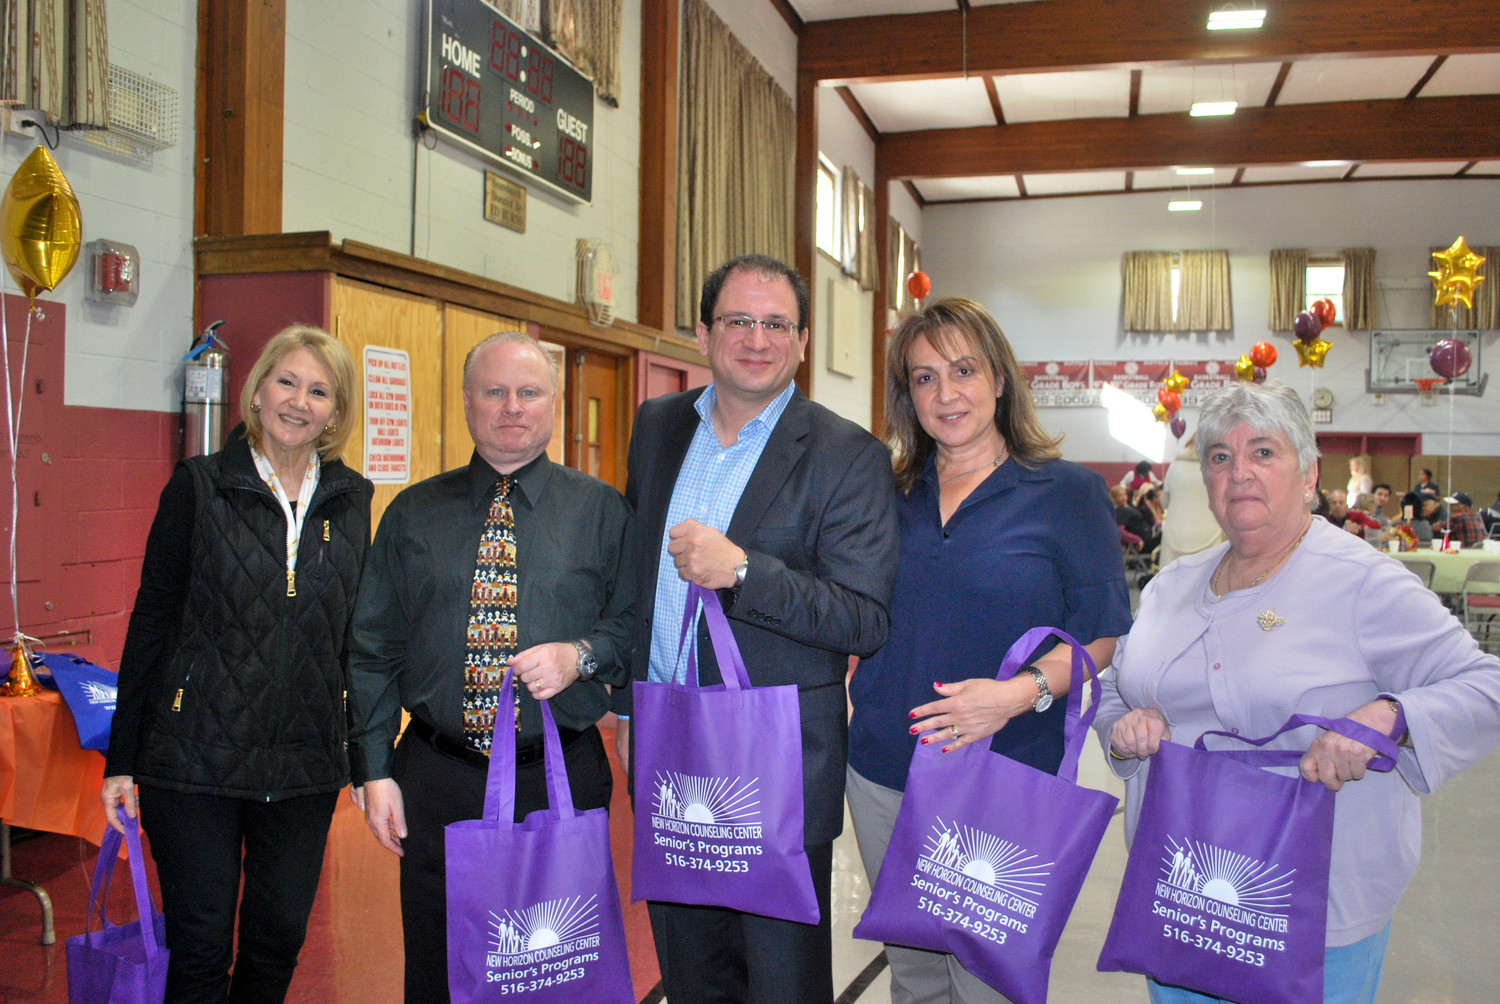 New Horizons Counseling Center handed out party favors at the holiday lunch. From left were Community Relations Coordinator Audrey Goodman, Assistant Programs Director Robert Robinson, CEO Herrick Lipton, Chief Administrative Officer Sigal Mashall and Board Vice President Gery DiDomenico.